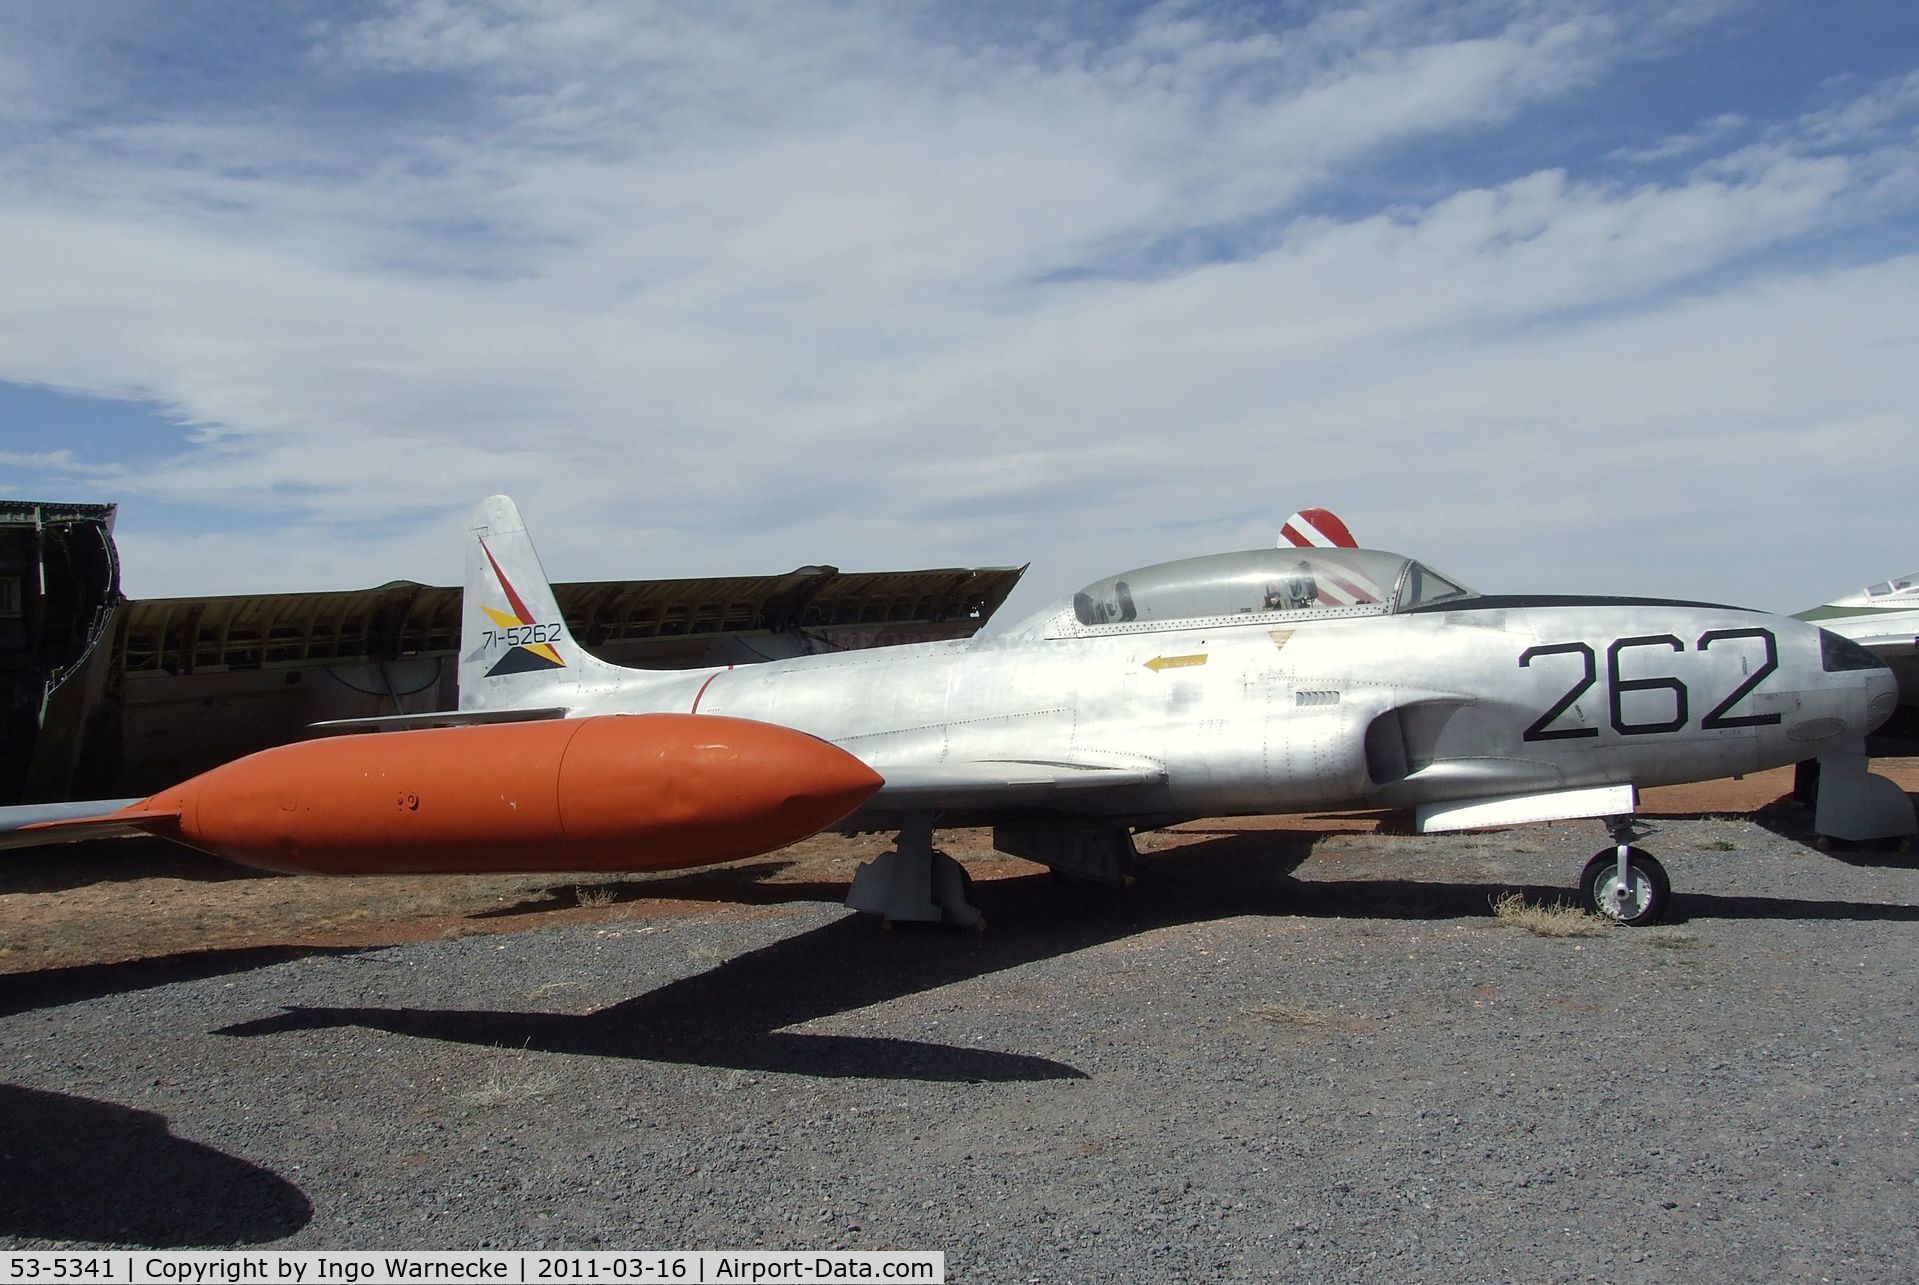 53-5341, 1953 Lockheed T-33A Shooting Star C/N 580-8680, Lockheed T-33A at the Planes of Fame Air Museum, Valle AZ